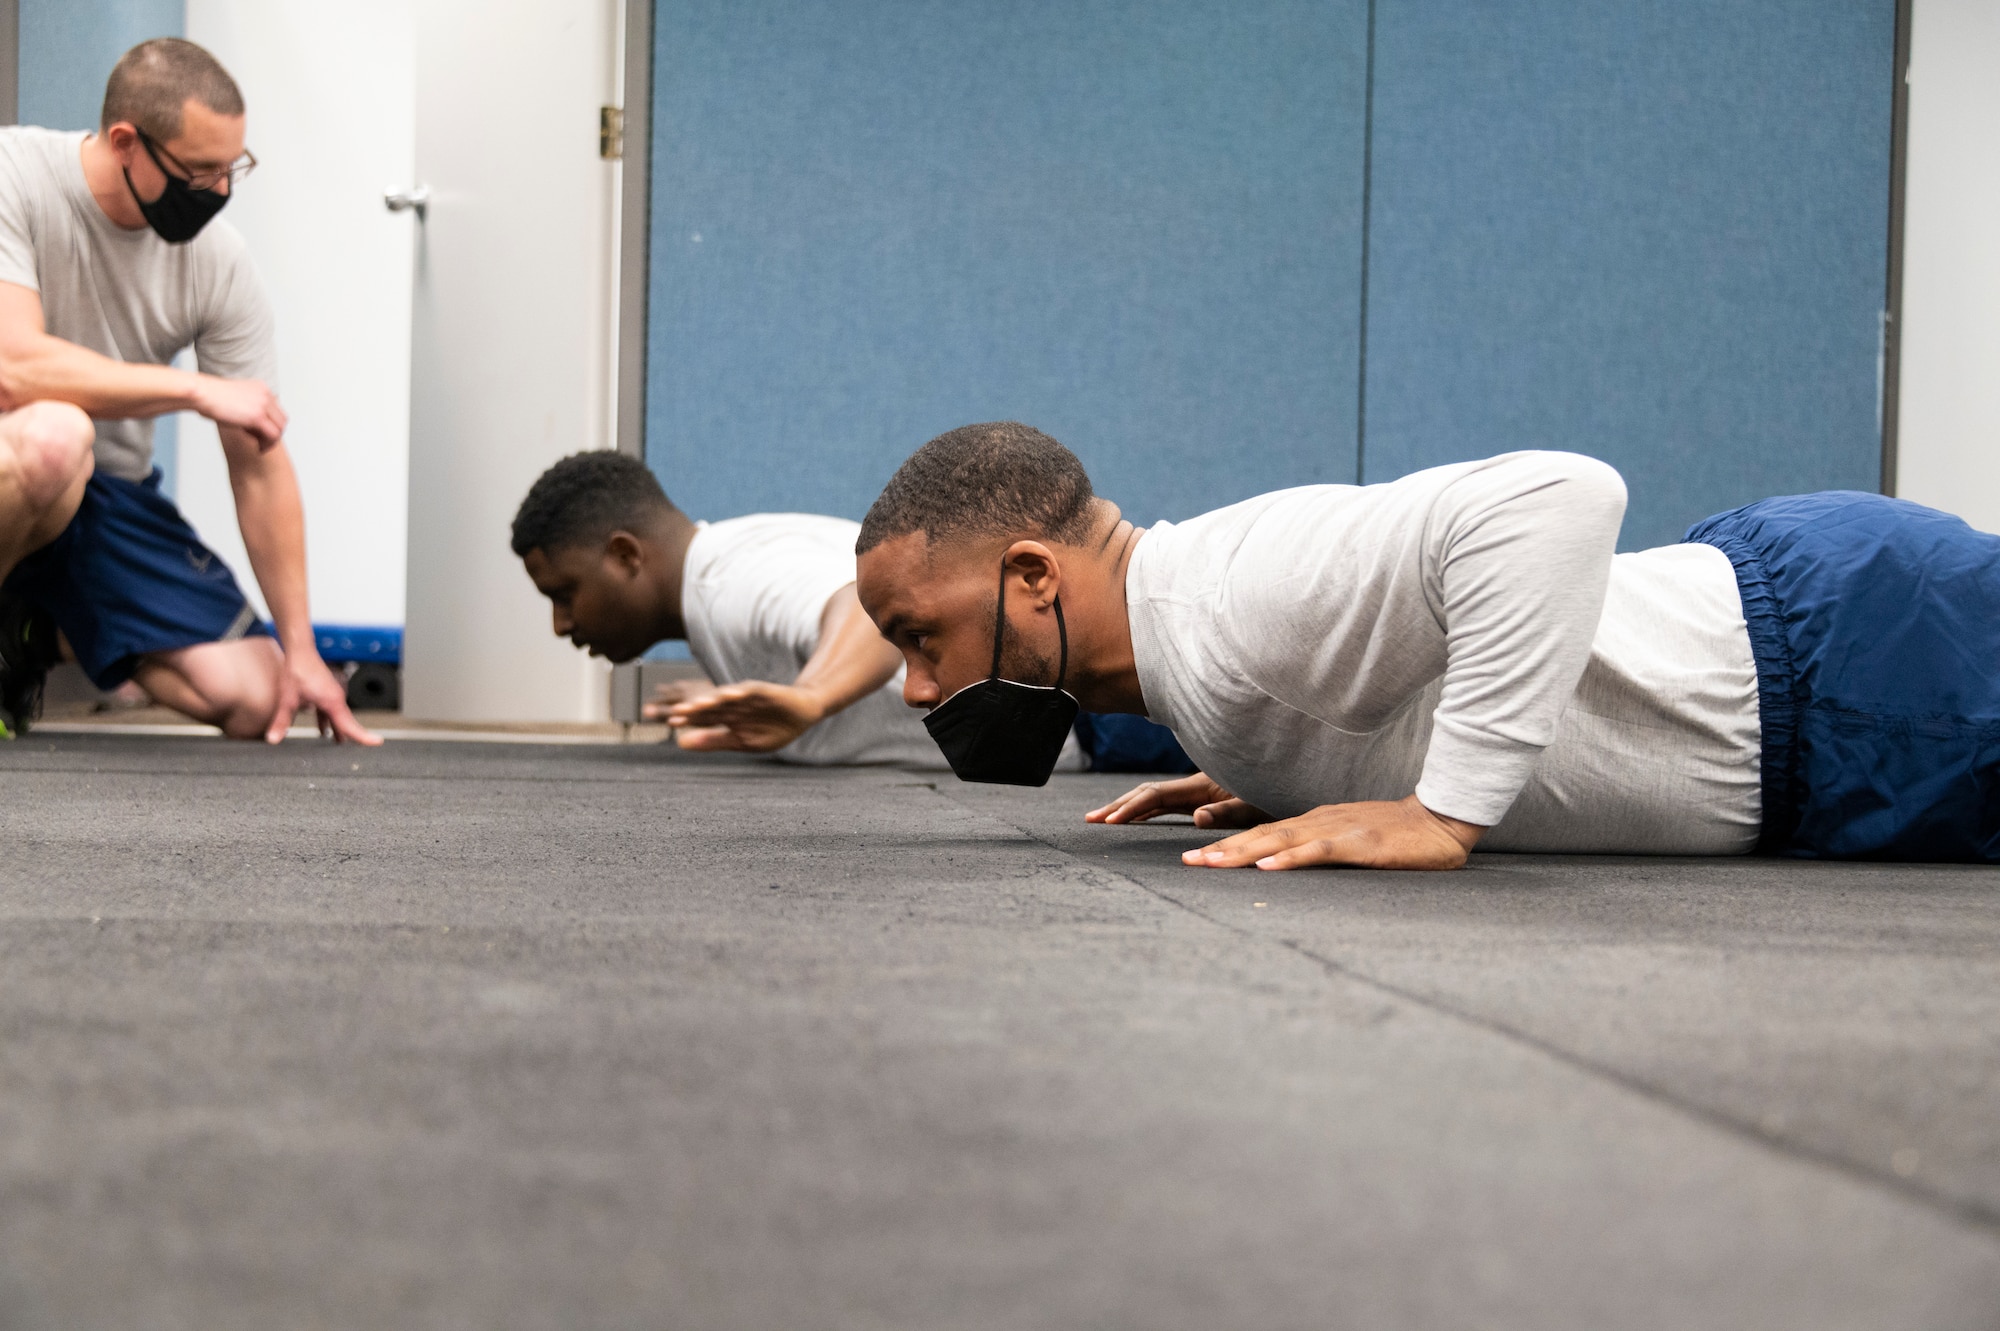 One person kneels, while two others perform push-up movements.